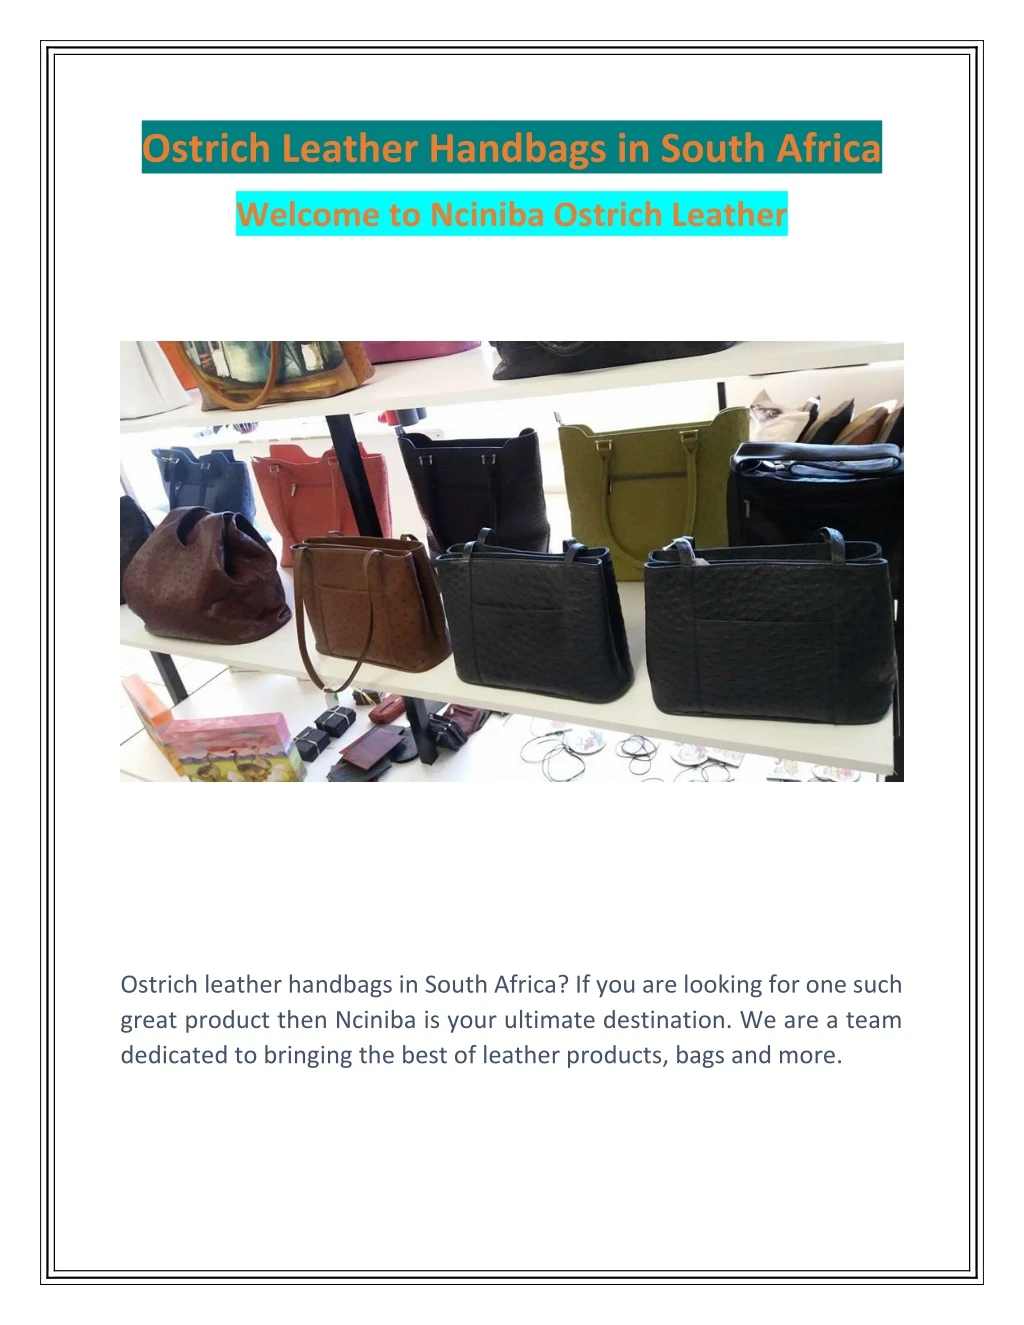 ostrich leather handbags in south africa